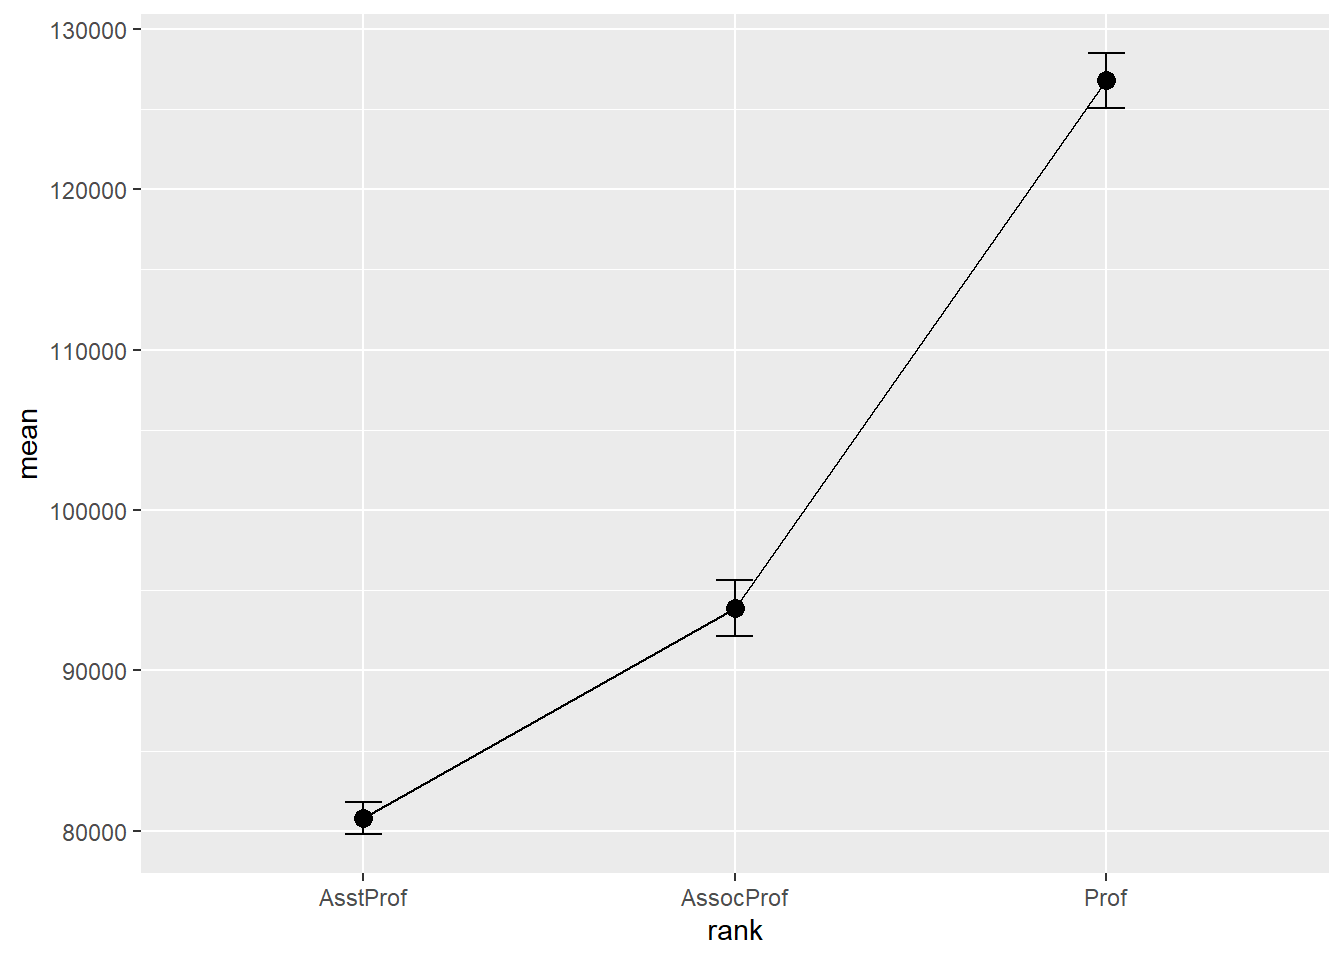 Mean plots with standard error bars